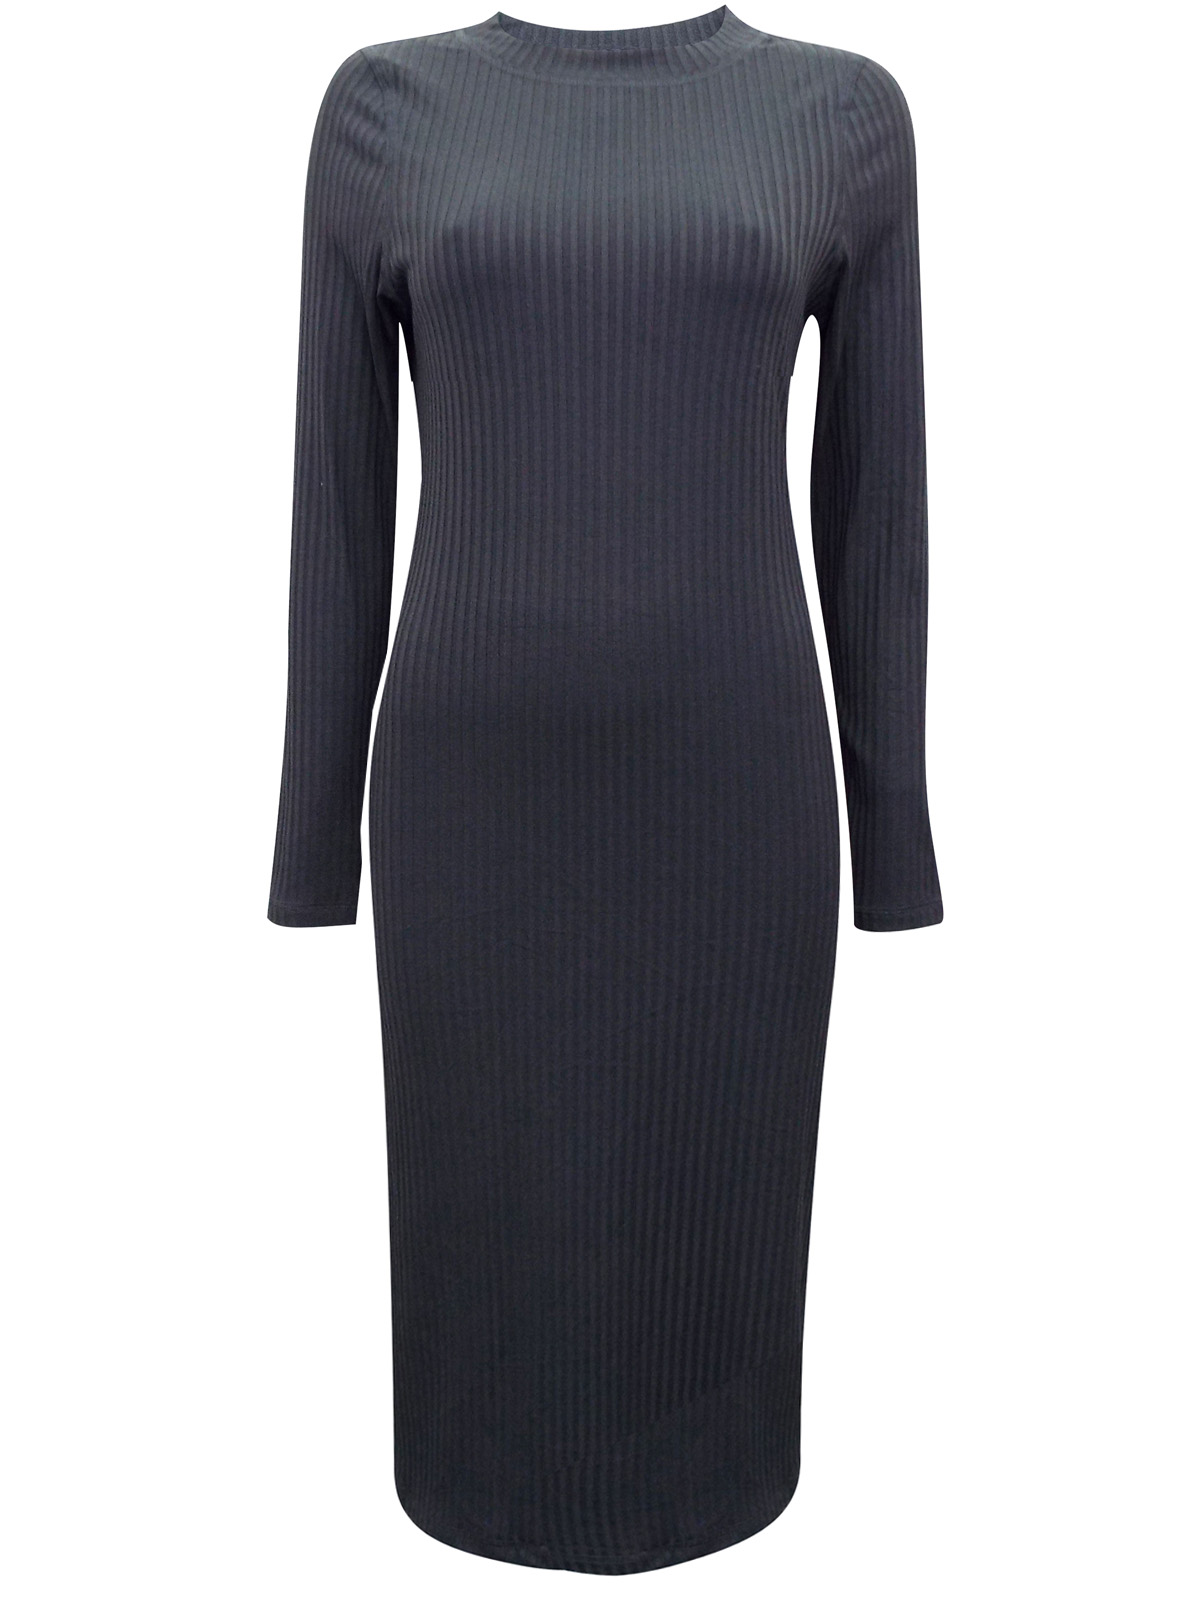 Marks and Spencer - - M&5 CHARCOAL Ribbed Long Sleeve Midi Dress - Size ...